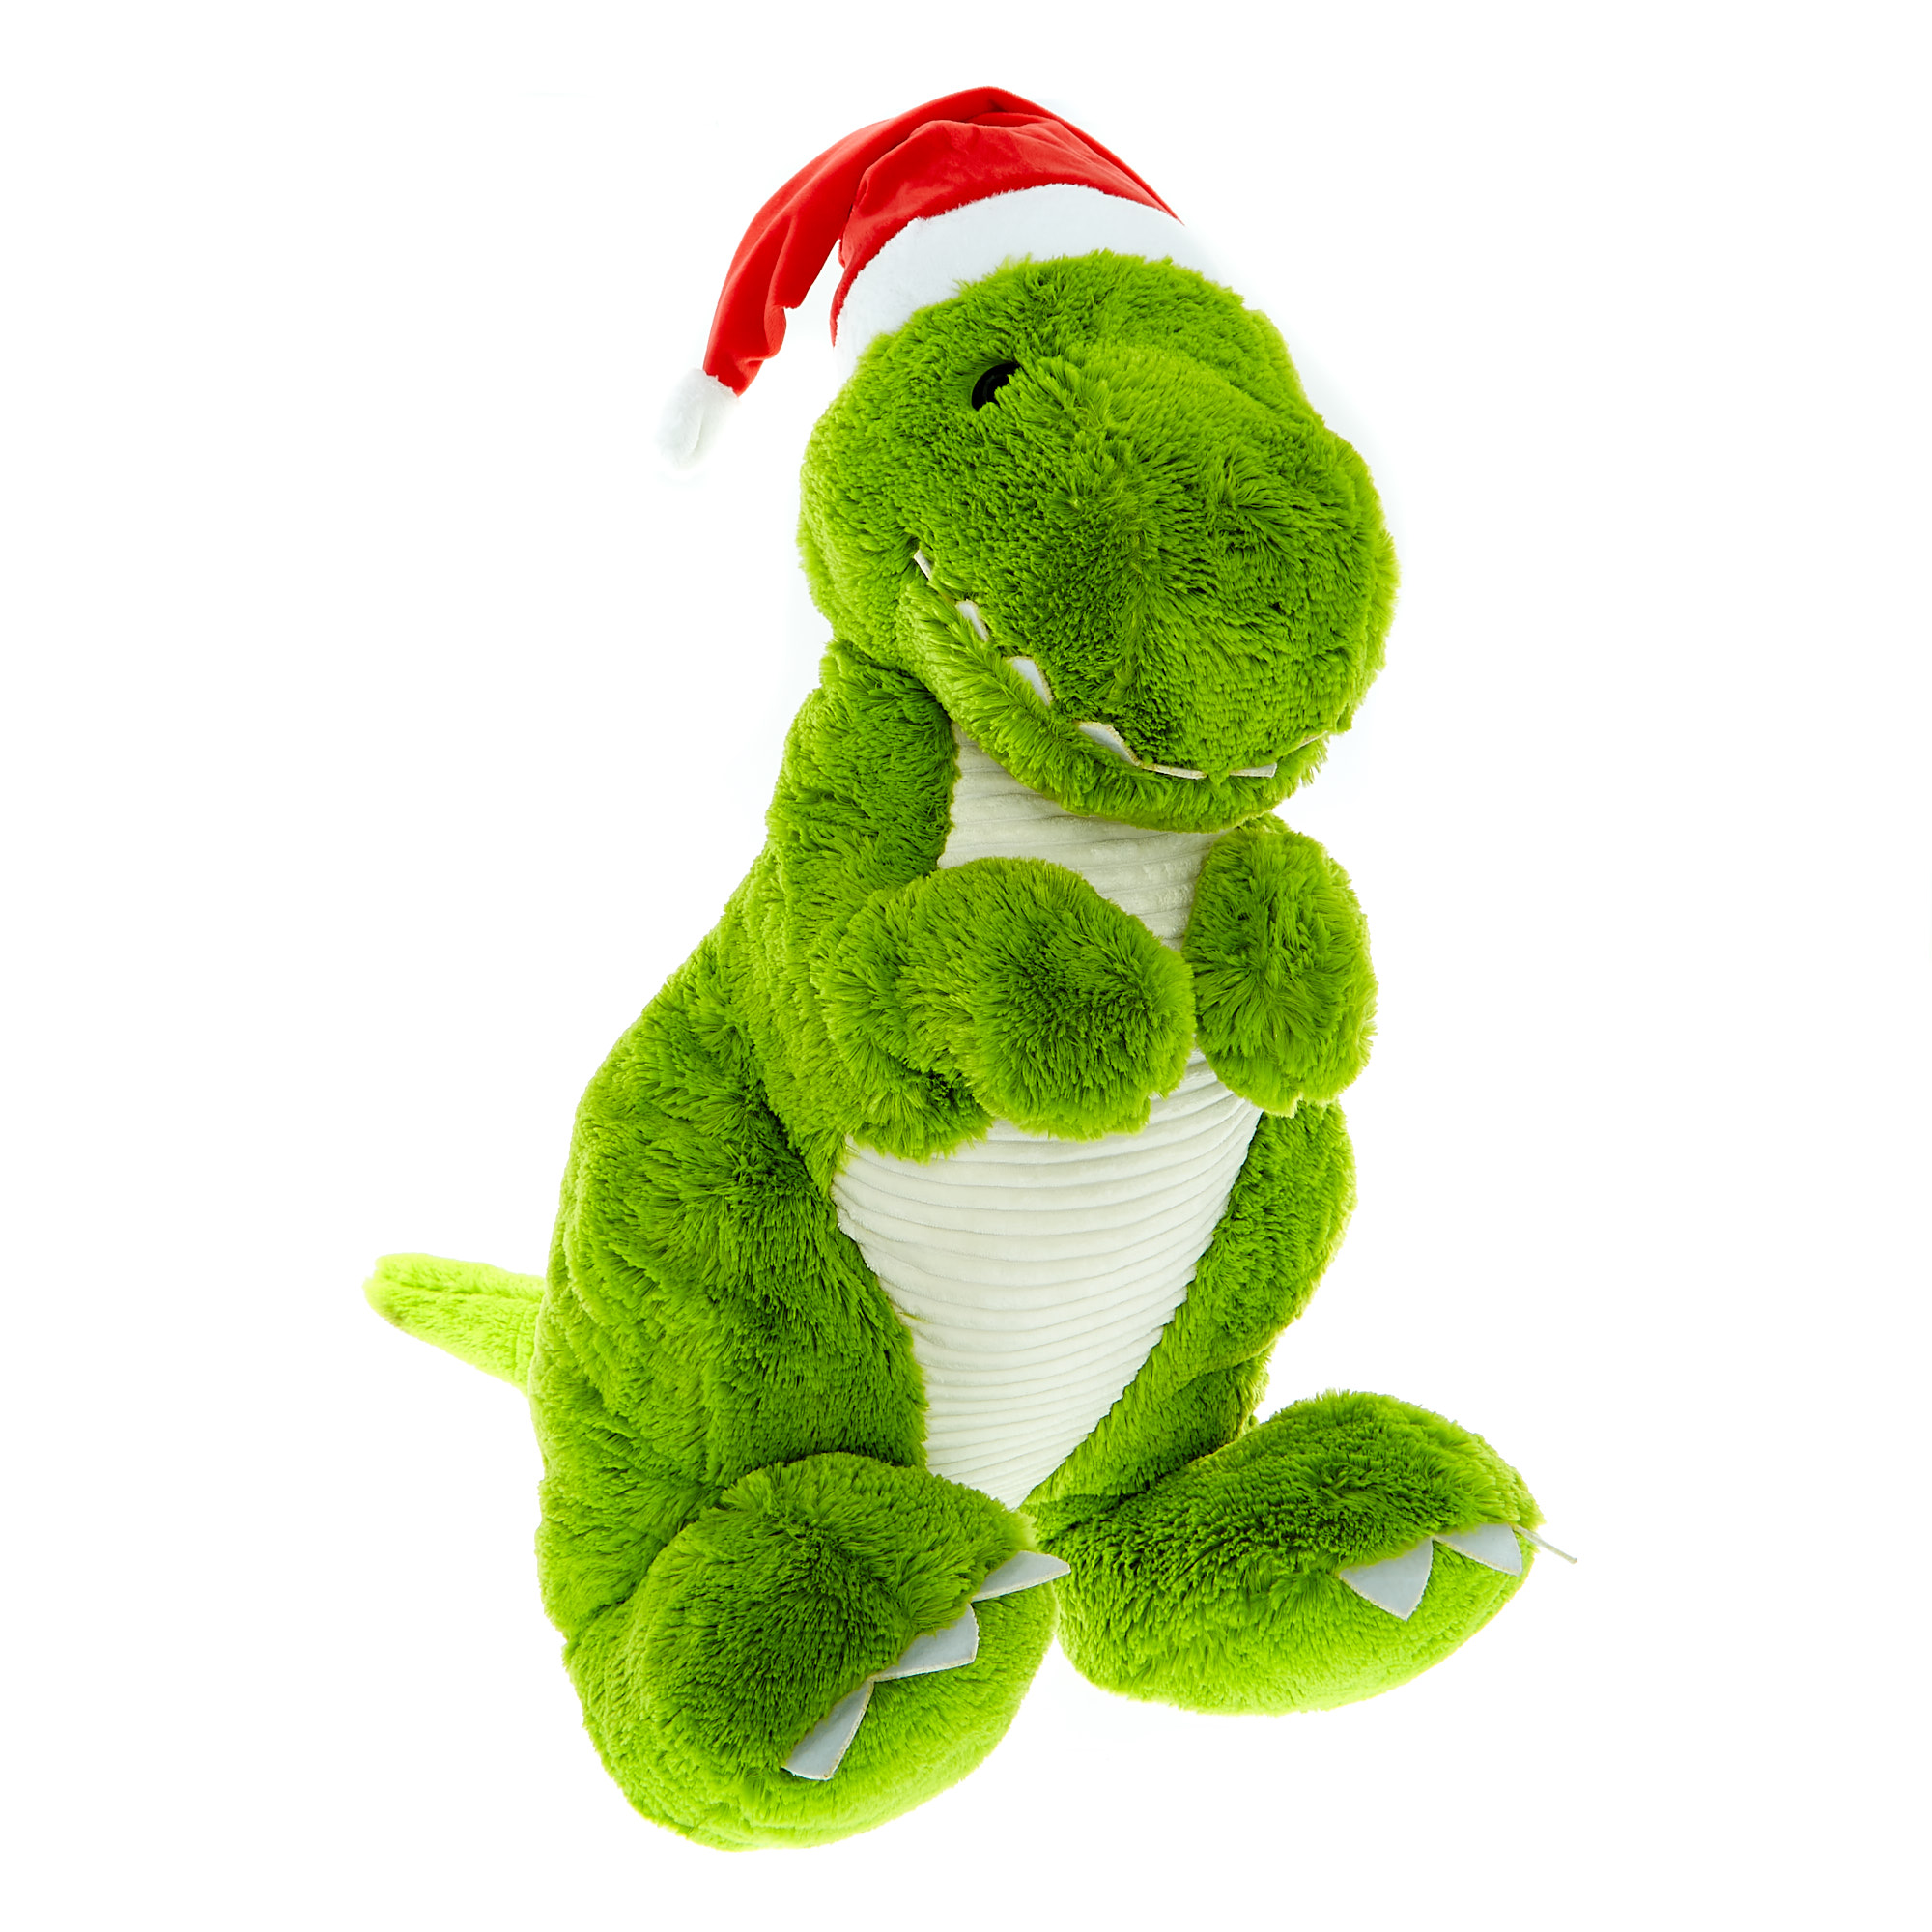 Buy Giant Dinosaur Soft Toy For Gbp 1999 Card Factory Uk 4867